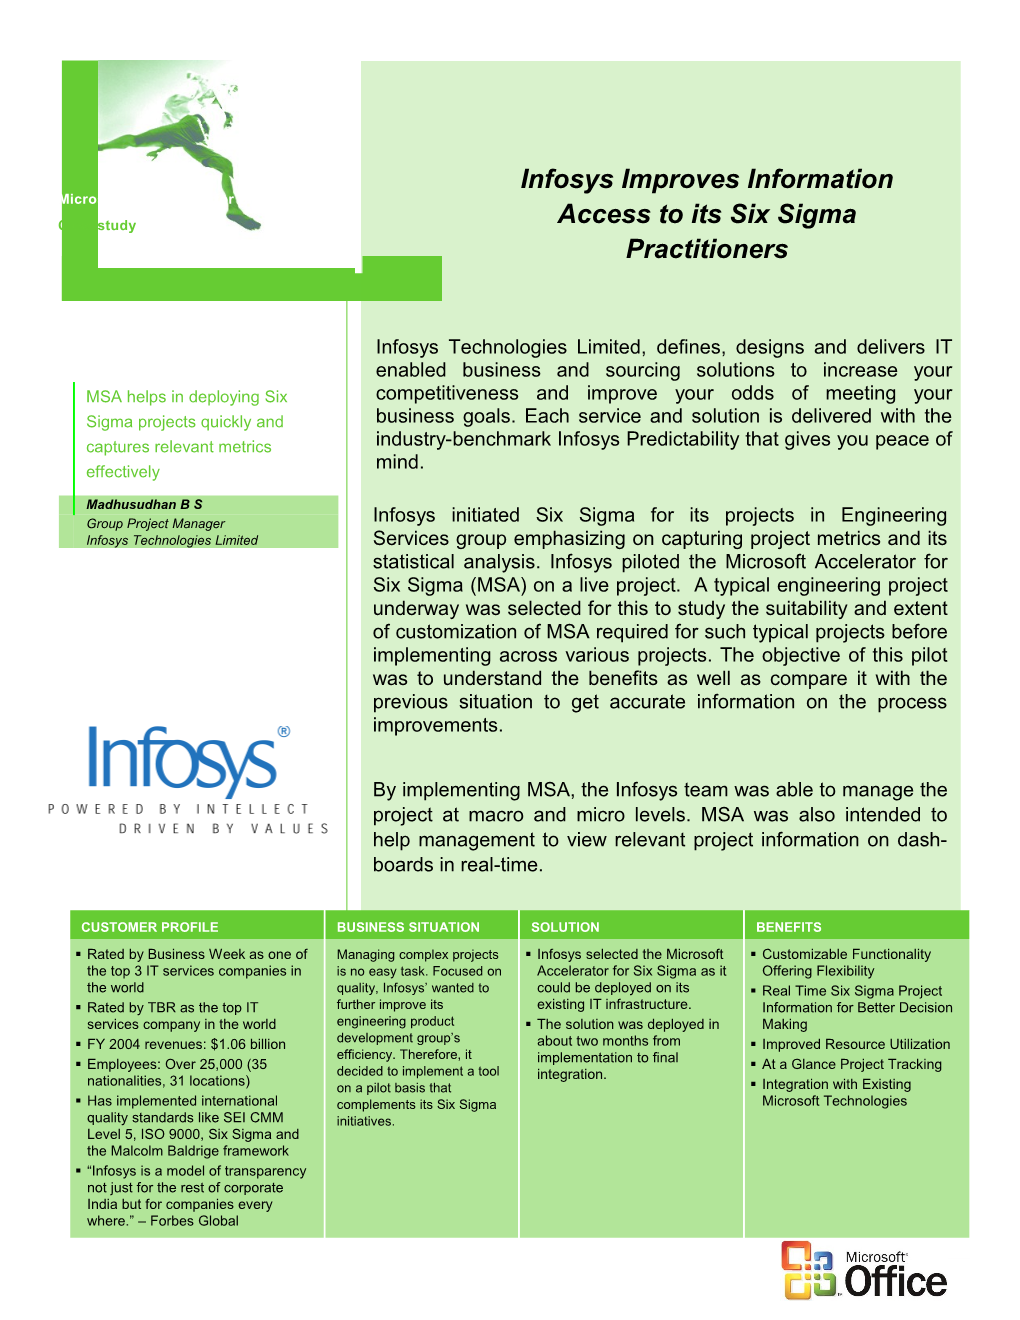 Infosys Technologies Limited, Defines, Designs and Delivers IT Enabled Business and Sourcing